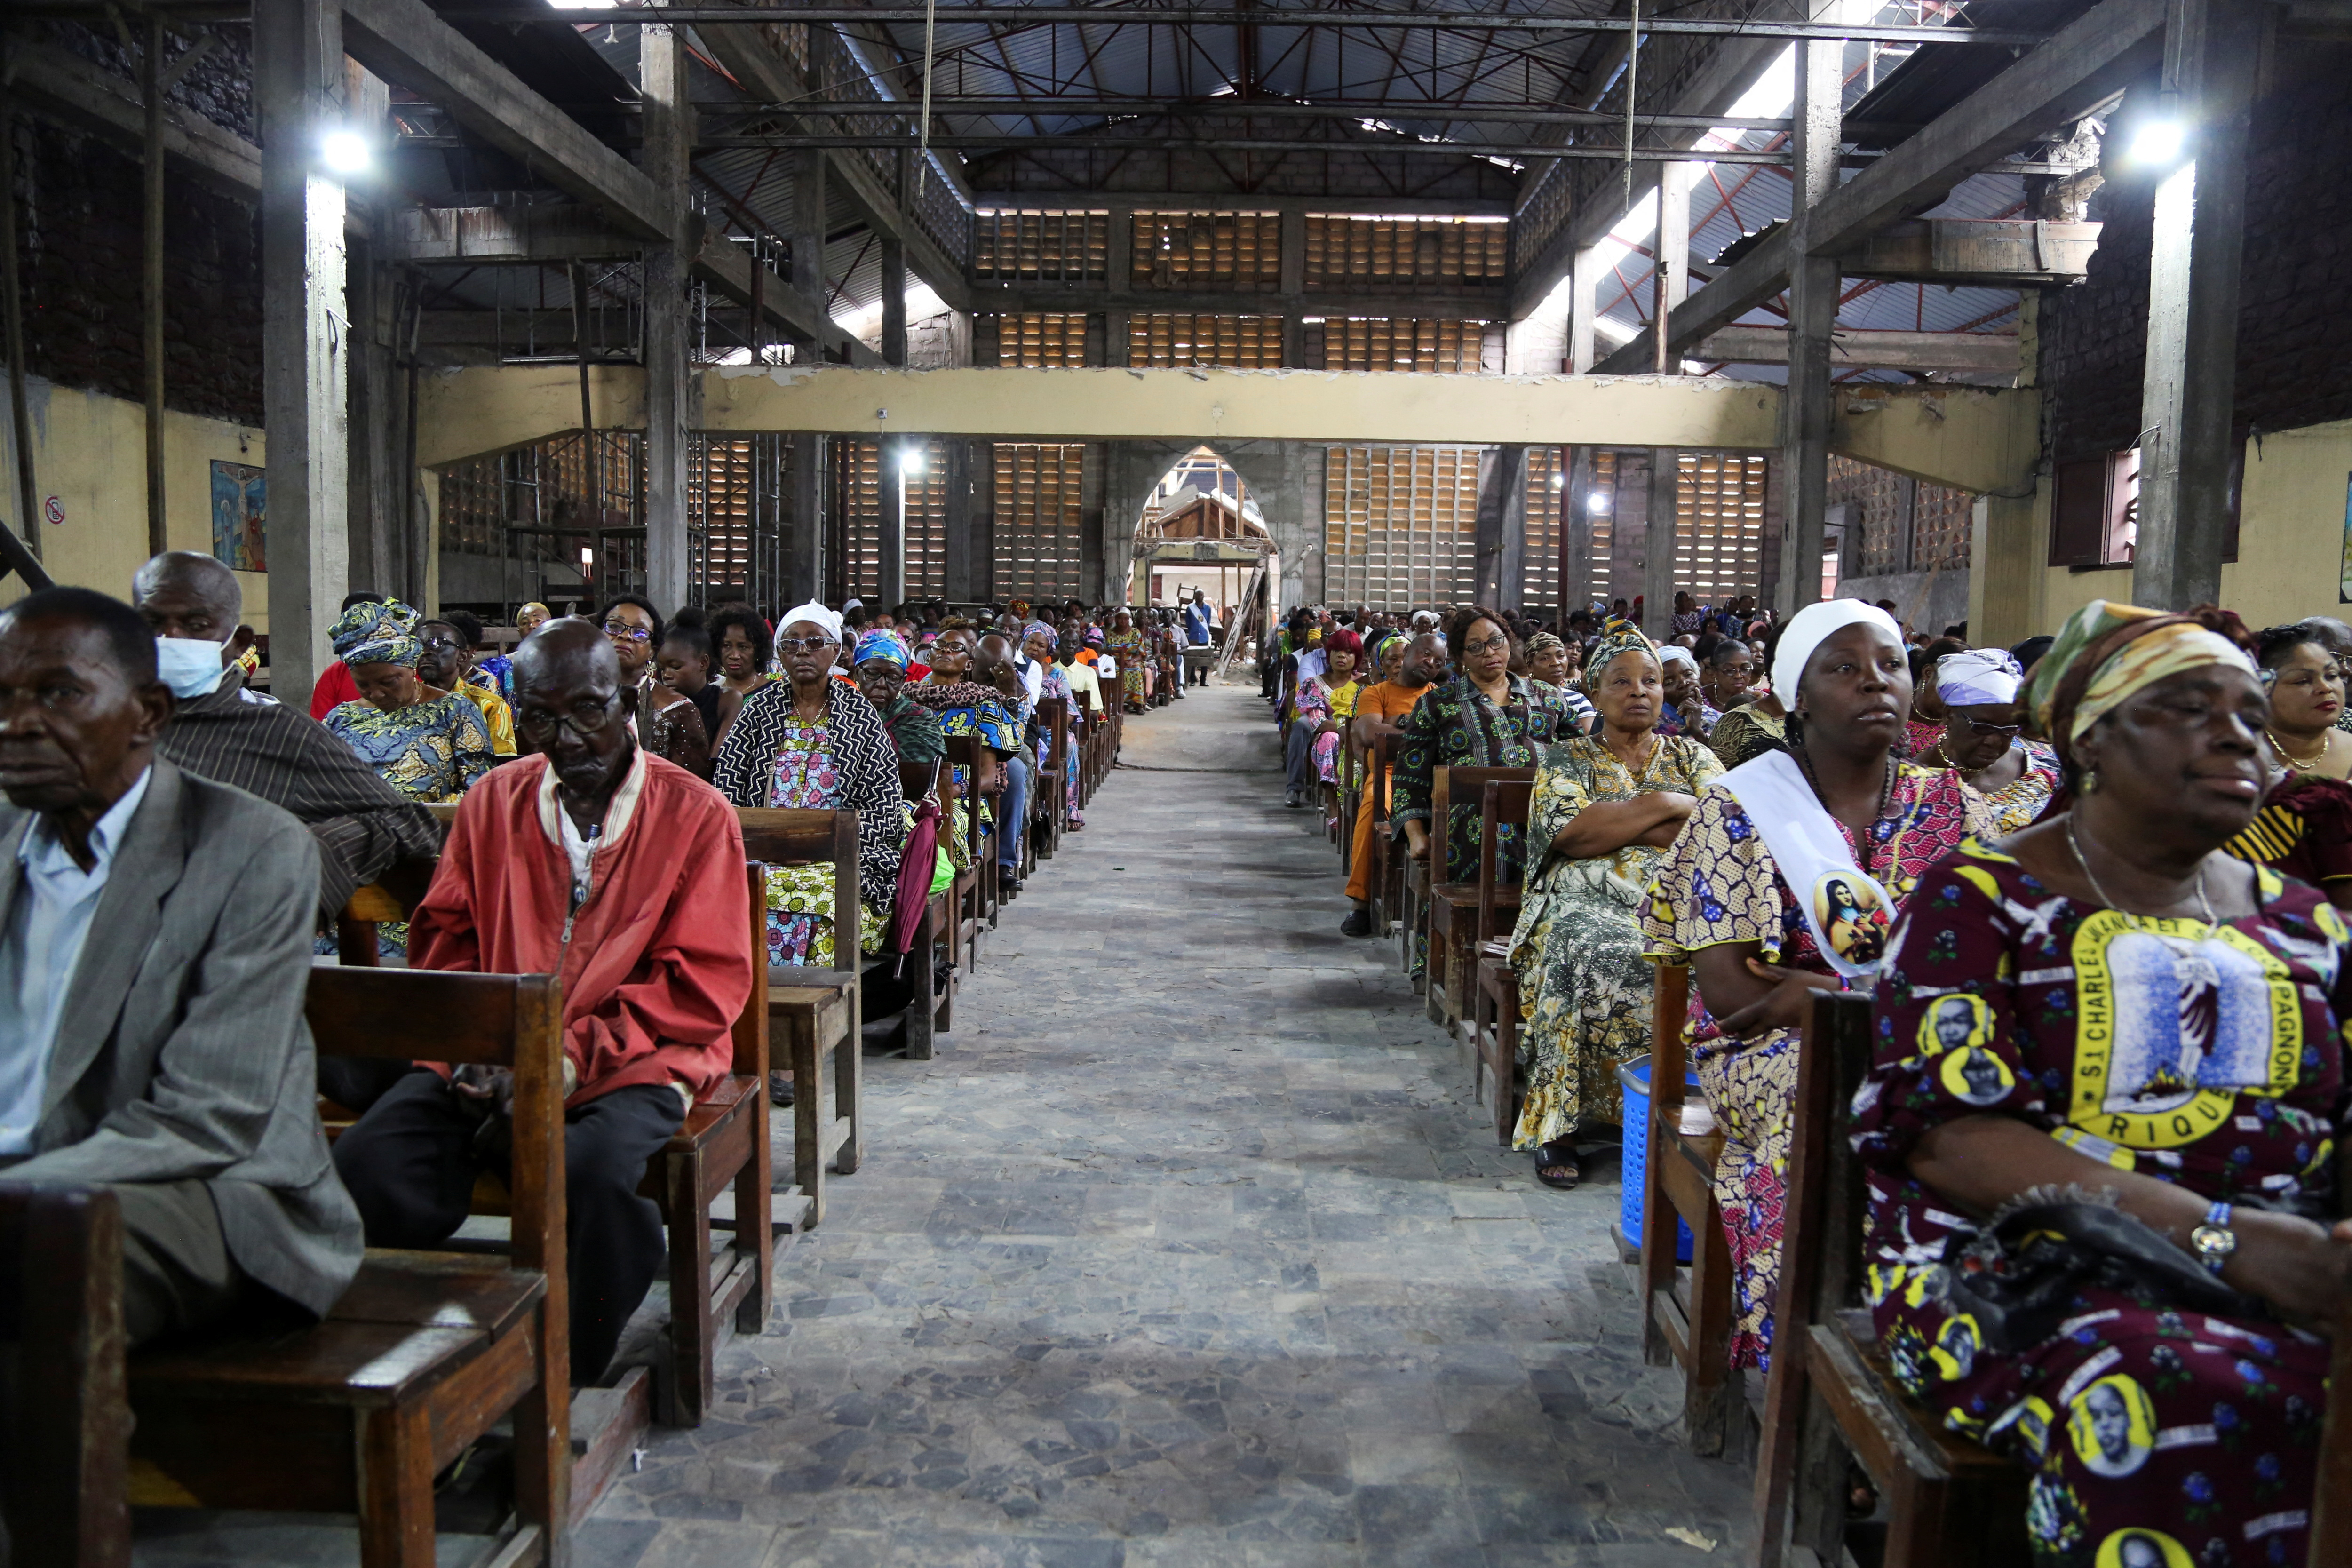 Congo's Catholic Church plays outsized role in march to democracy